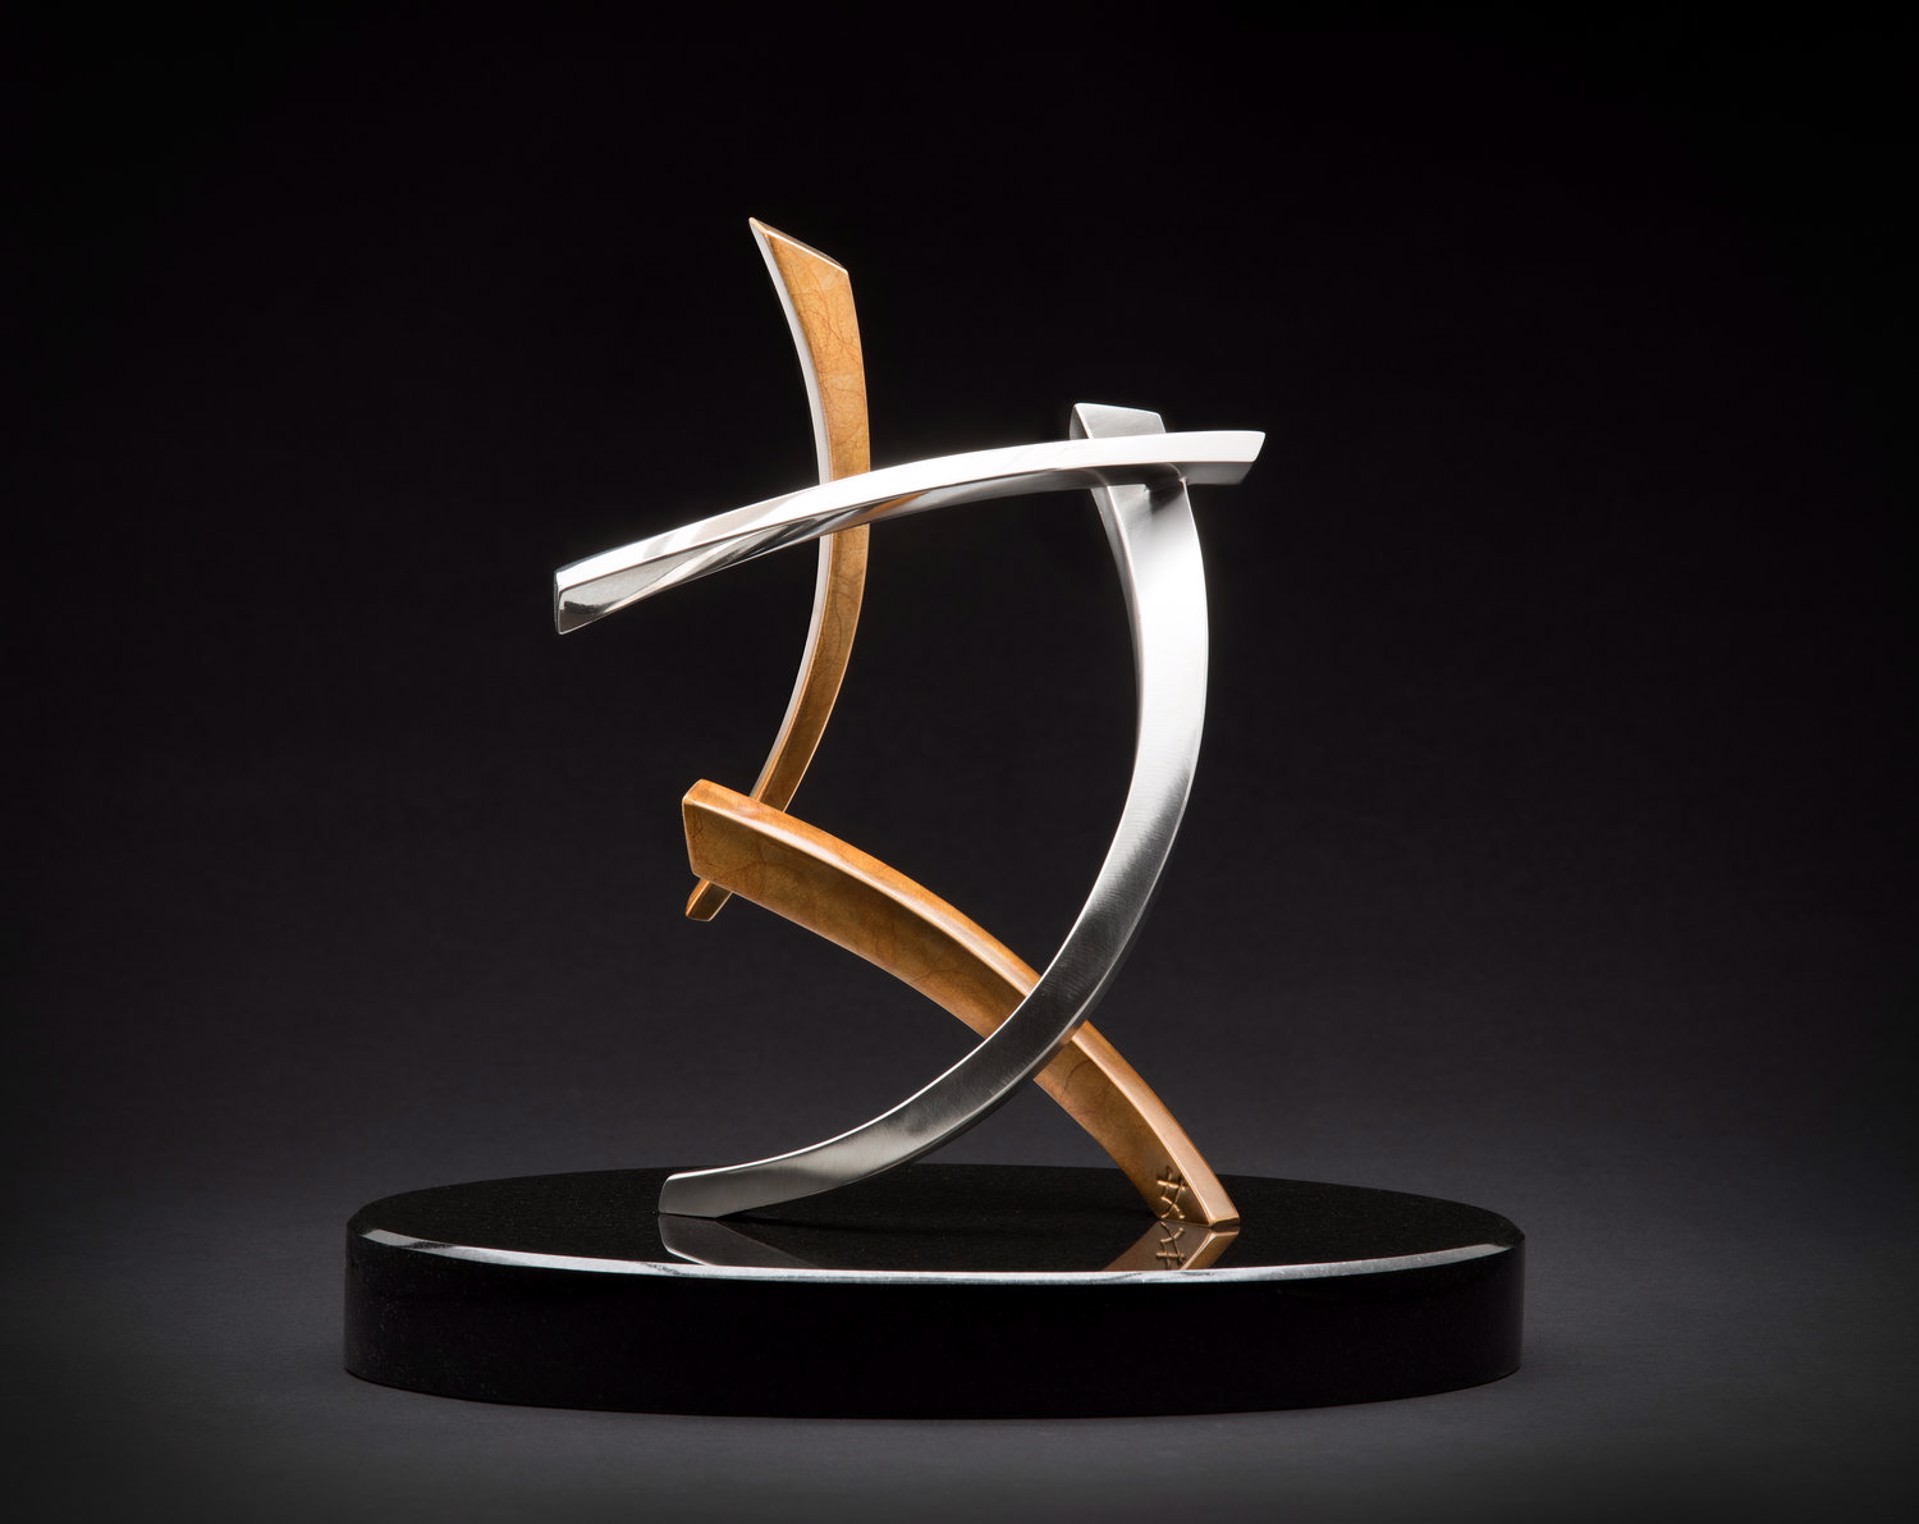 Elegance ~ “This sculpture is part of my Relational series. Warm colors, soft curves and refined lines capture the beauty of woman. I like how the warmth of the bronze shows through the seaside patina.” by Casey Horn